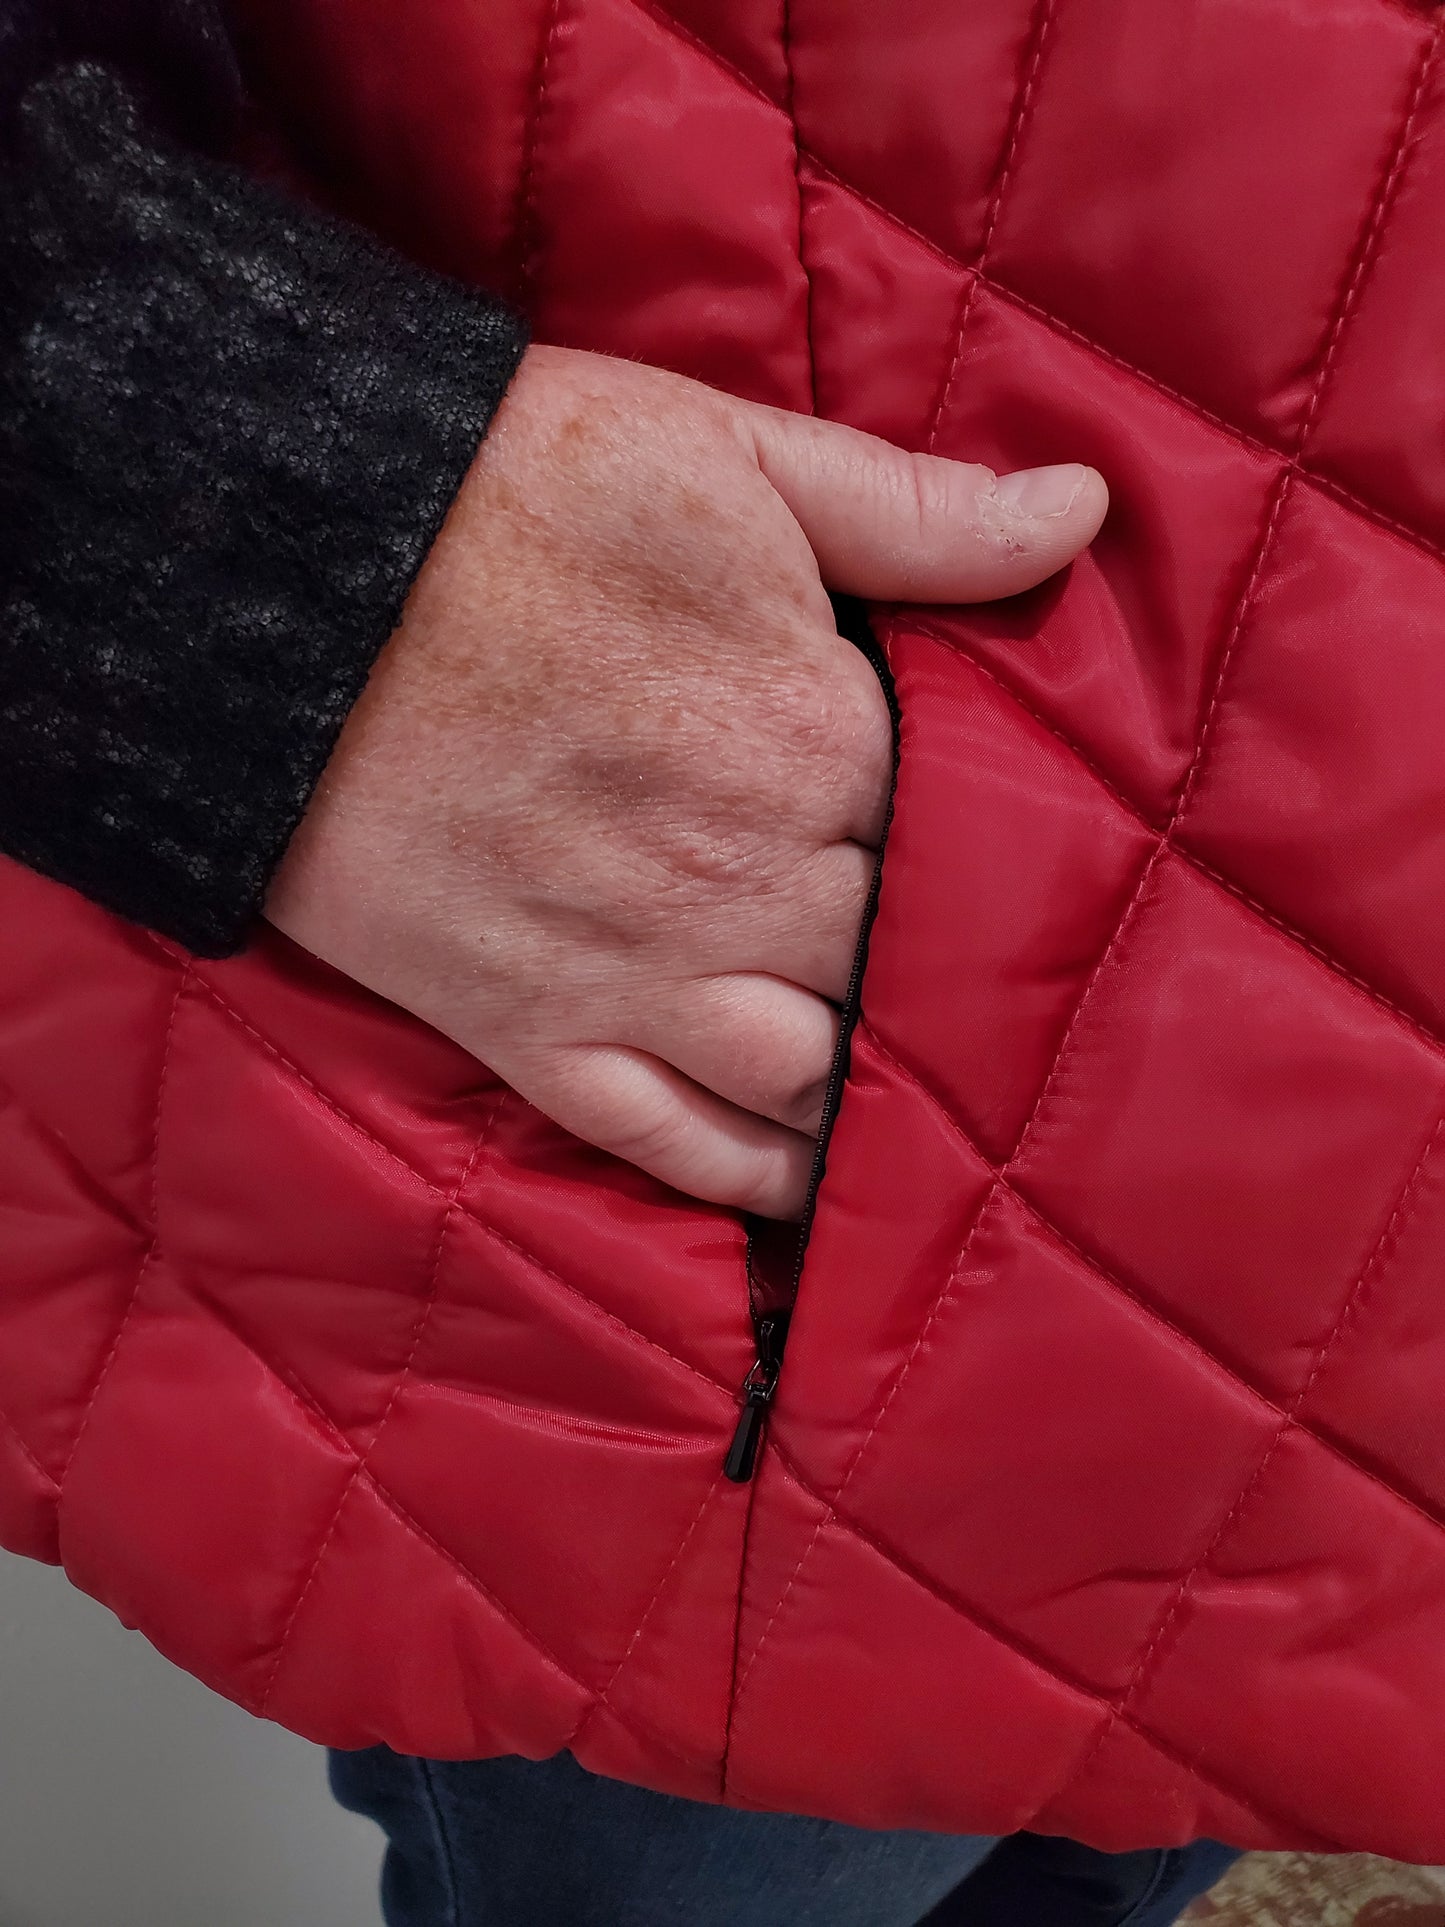 CLASSIC QUILTED PUFFER VEST